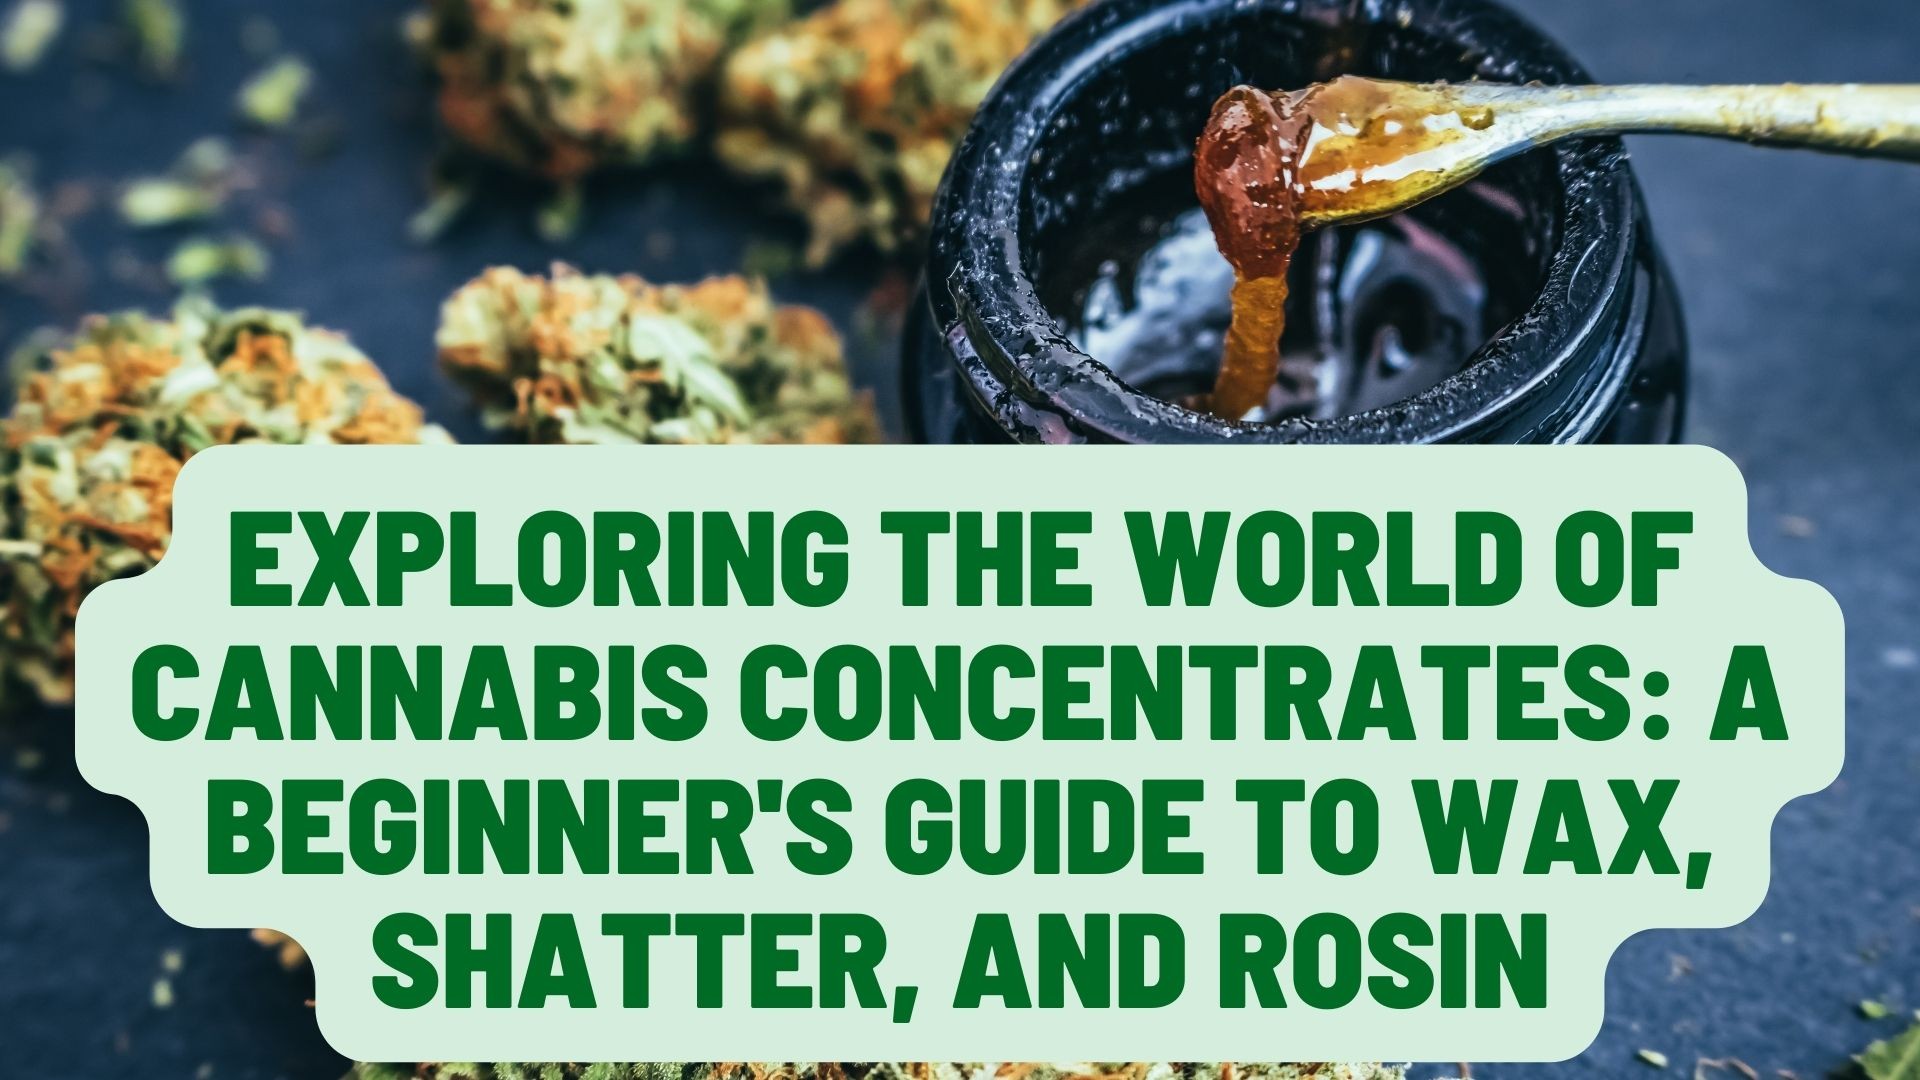 Exploring the World of Cannabis Concentrates: A Beginner's Guide to Wax, Shatter, and Rosin